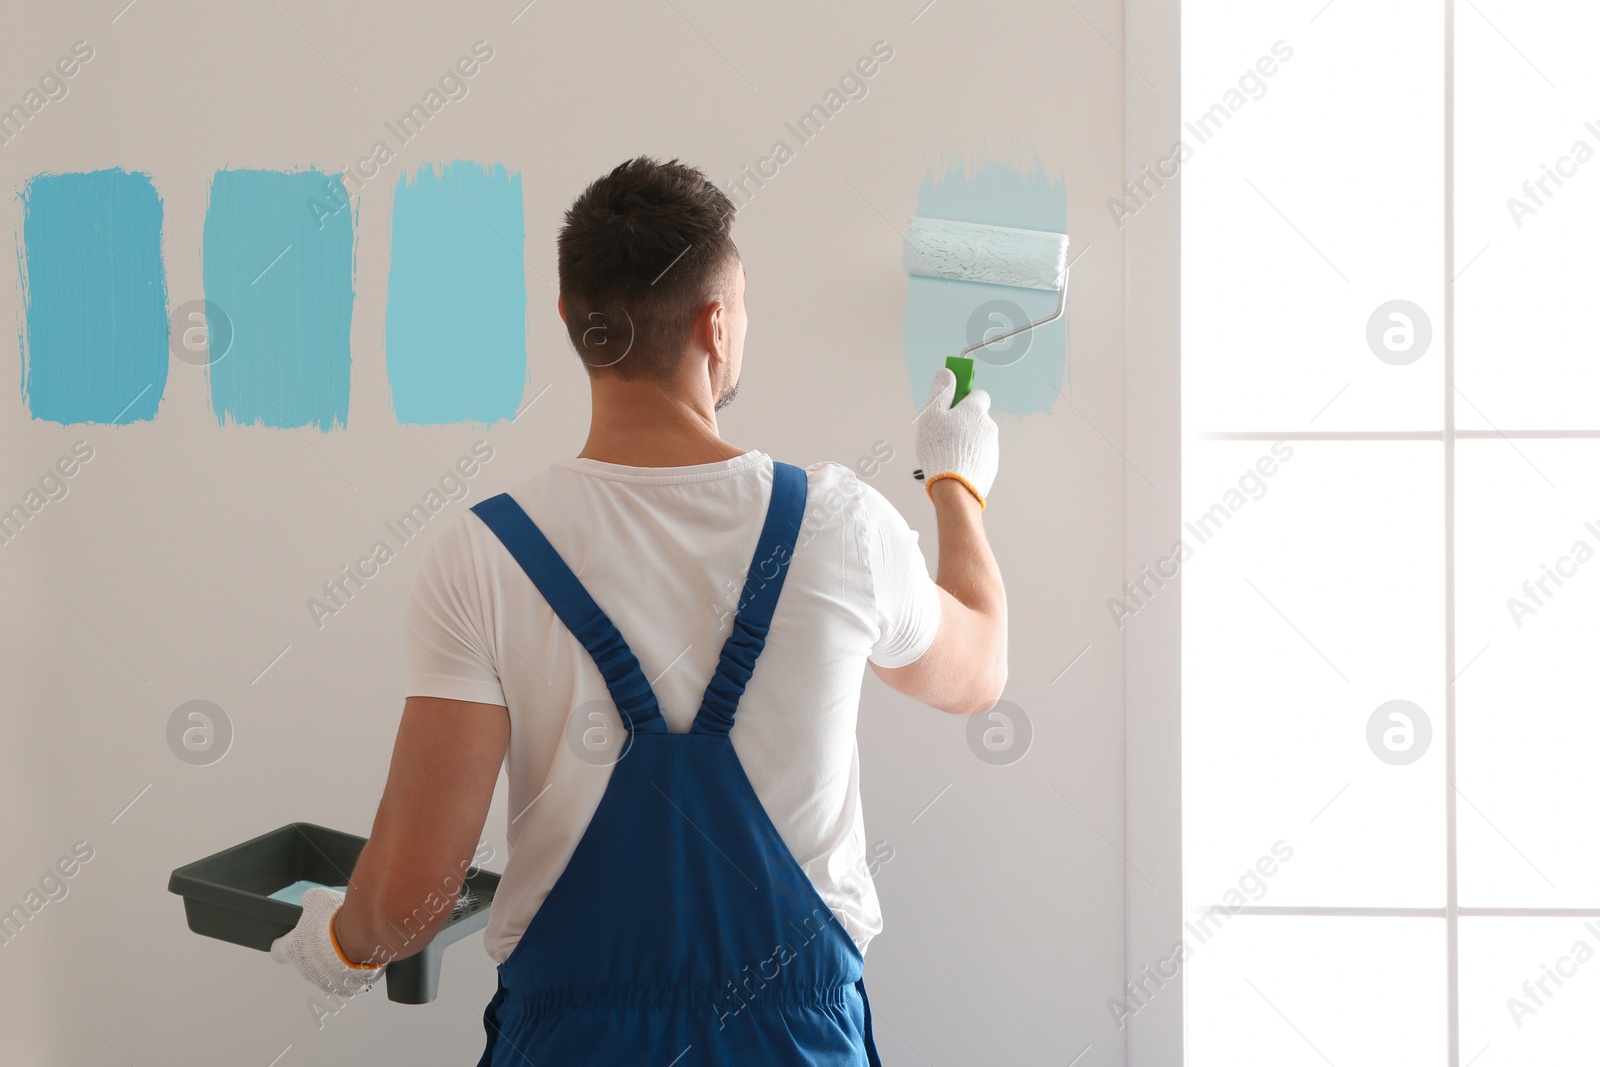 Image of Man painting wall with light blue dye indoors, back view